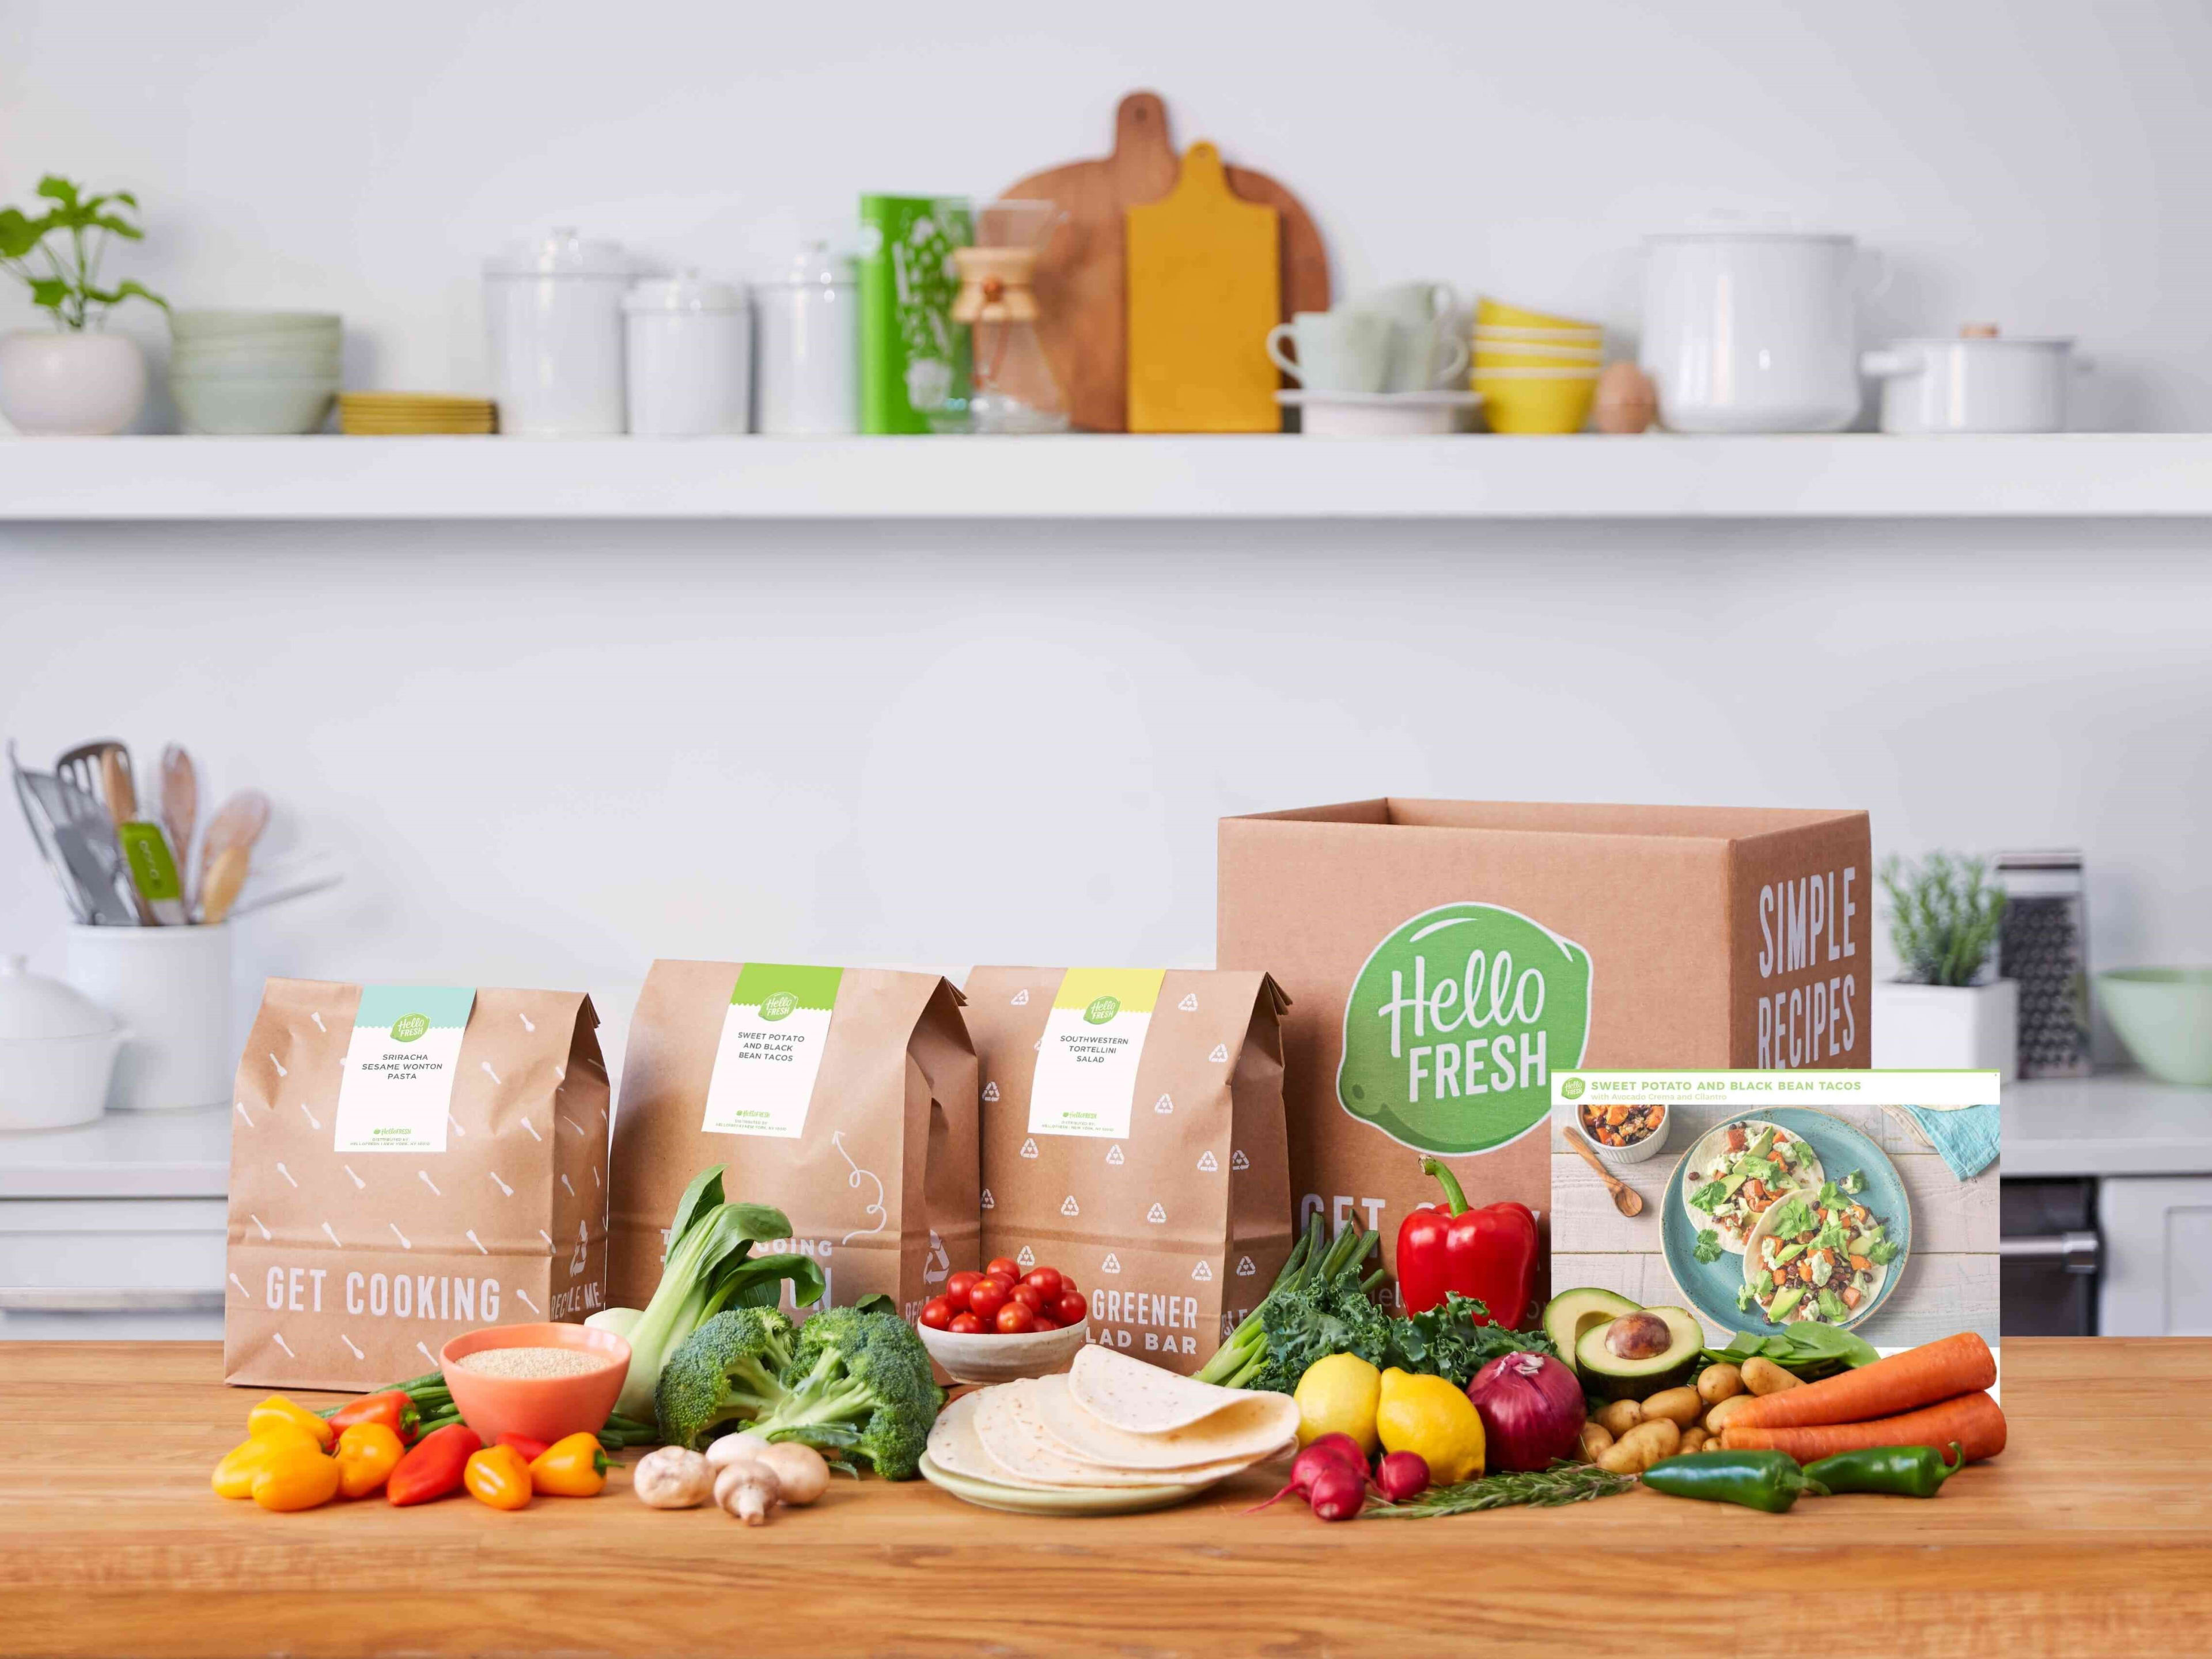 The flexible & commitment-free meal subscription service